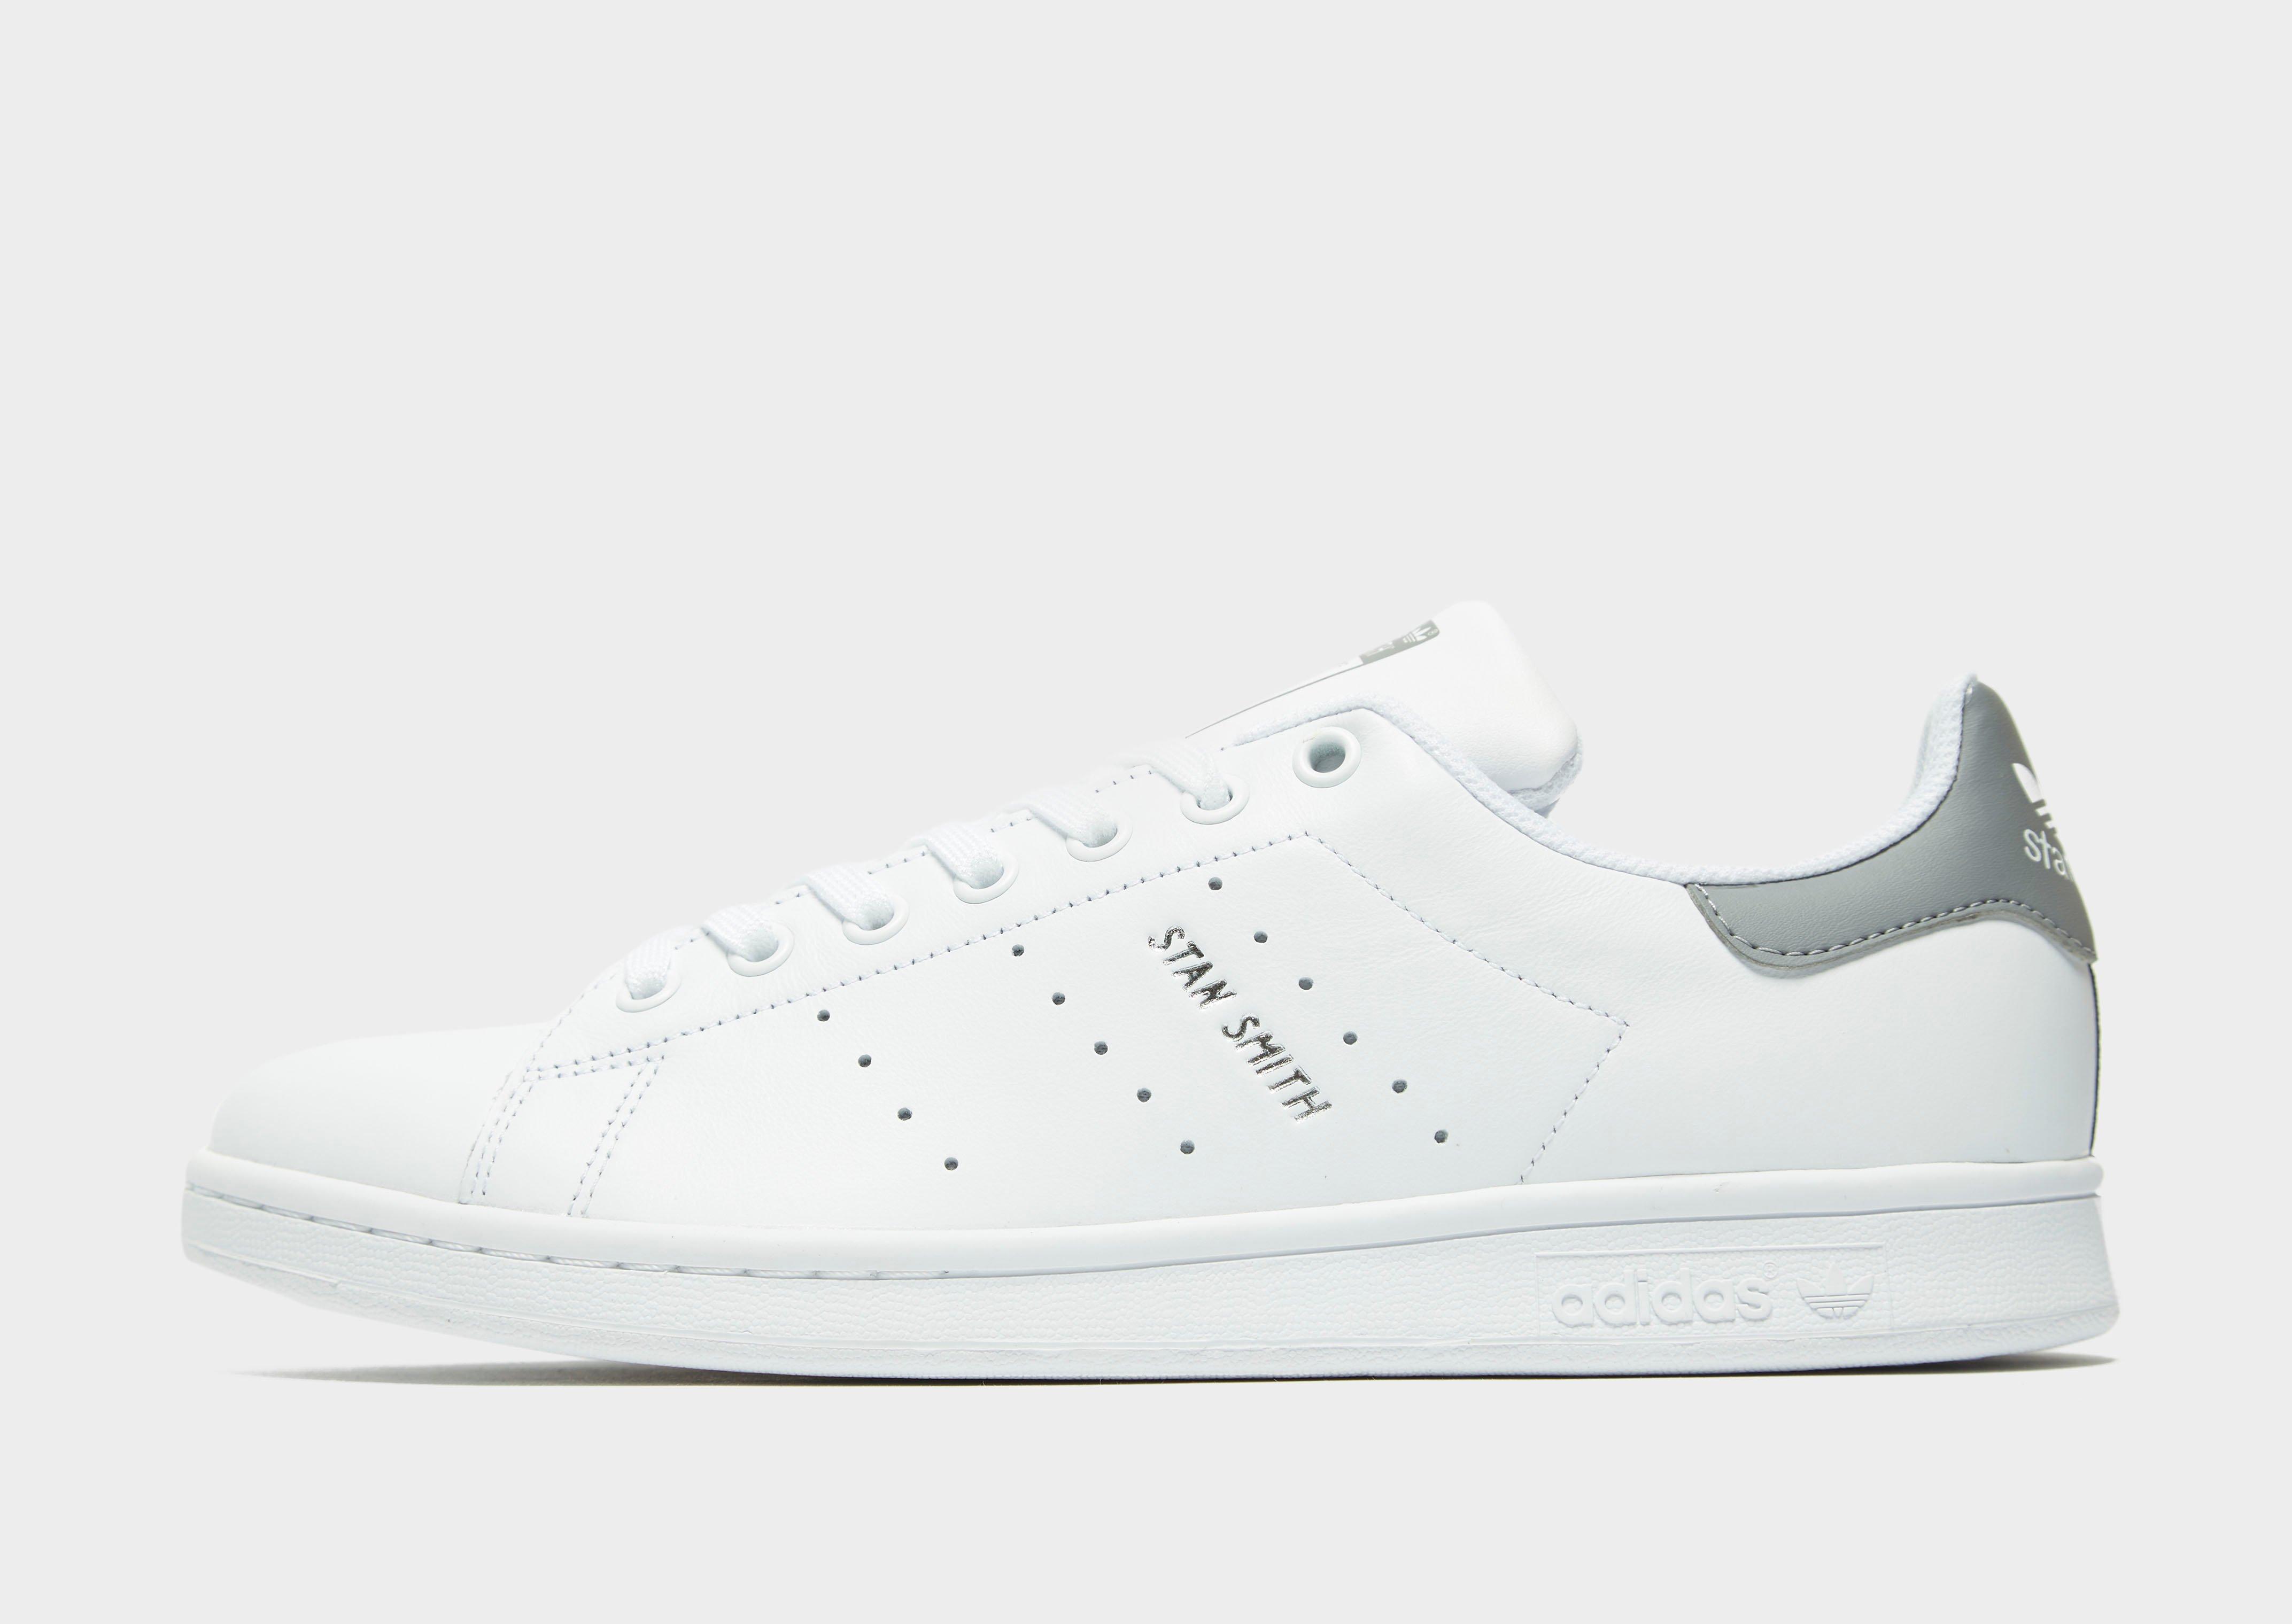 how much are stan smiths